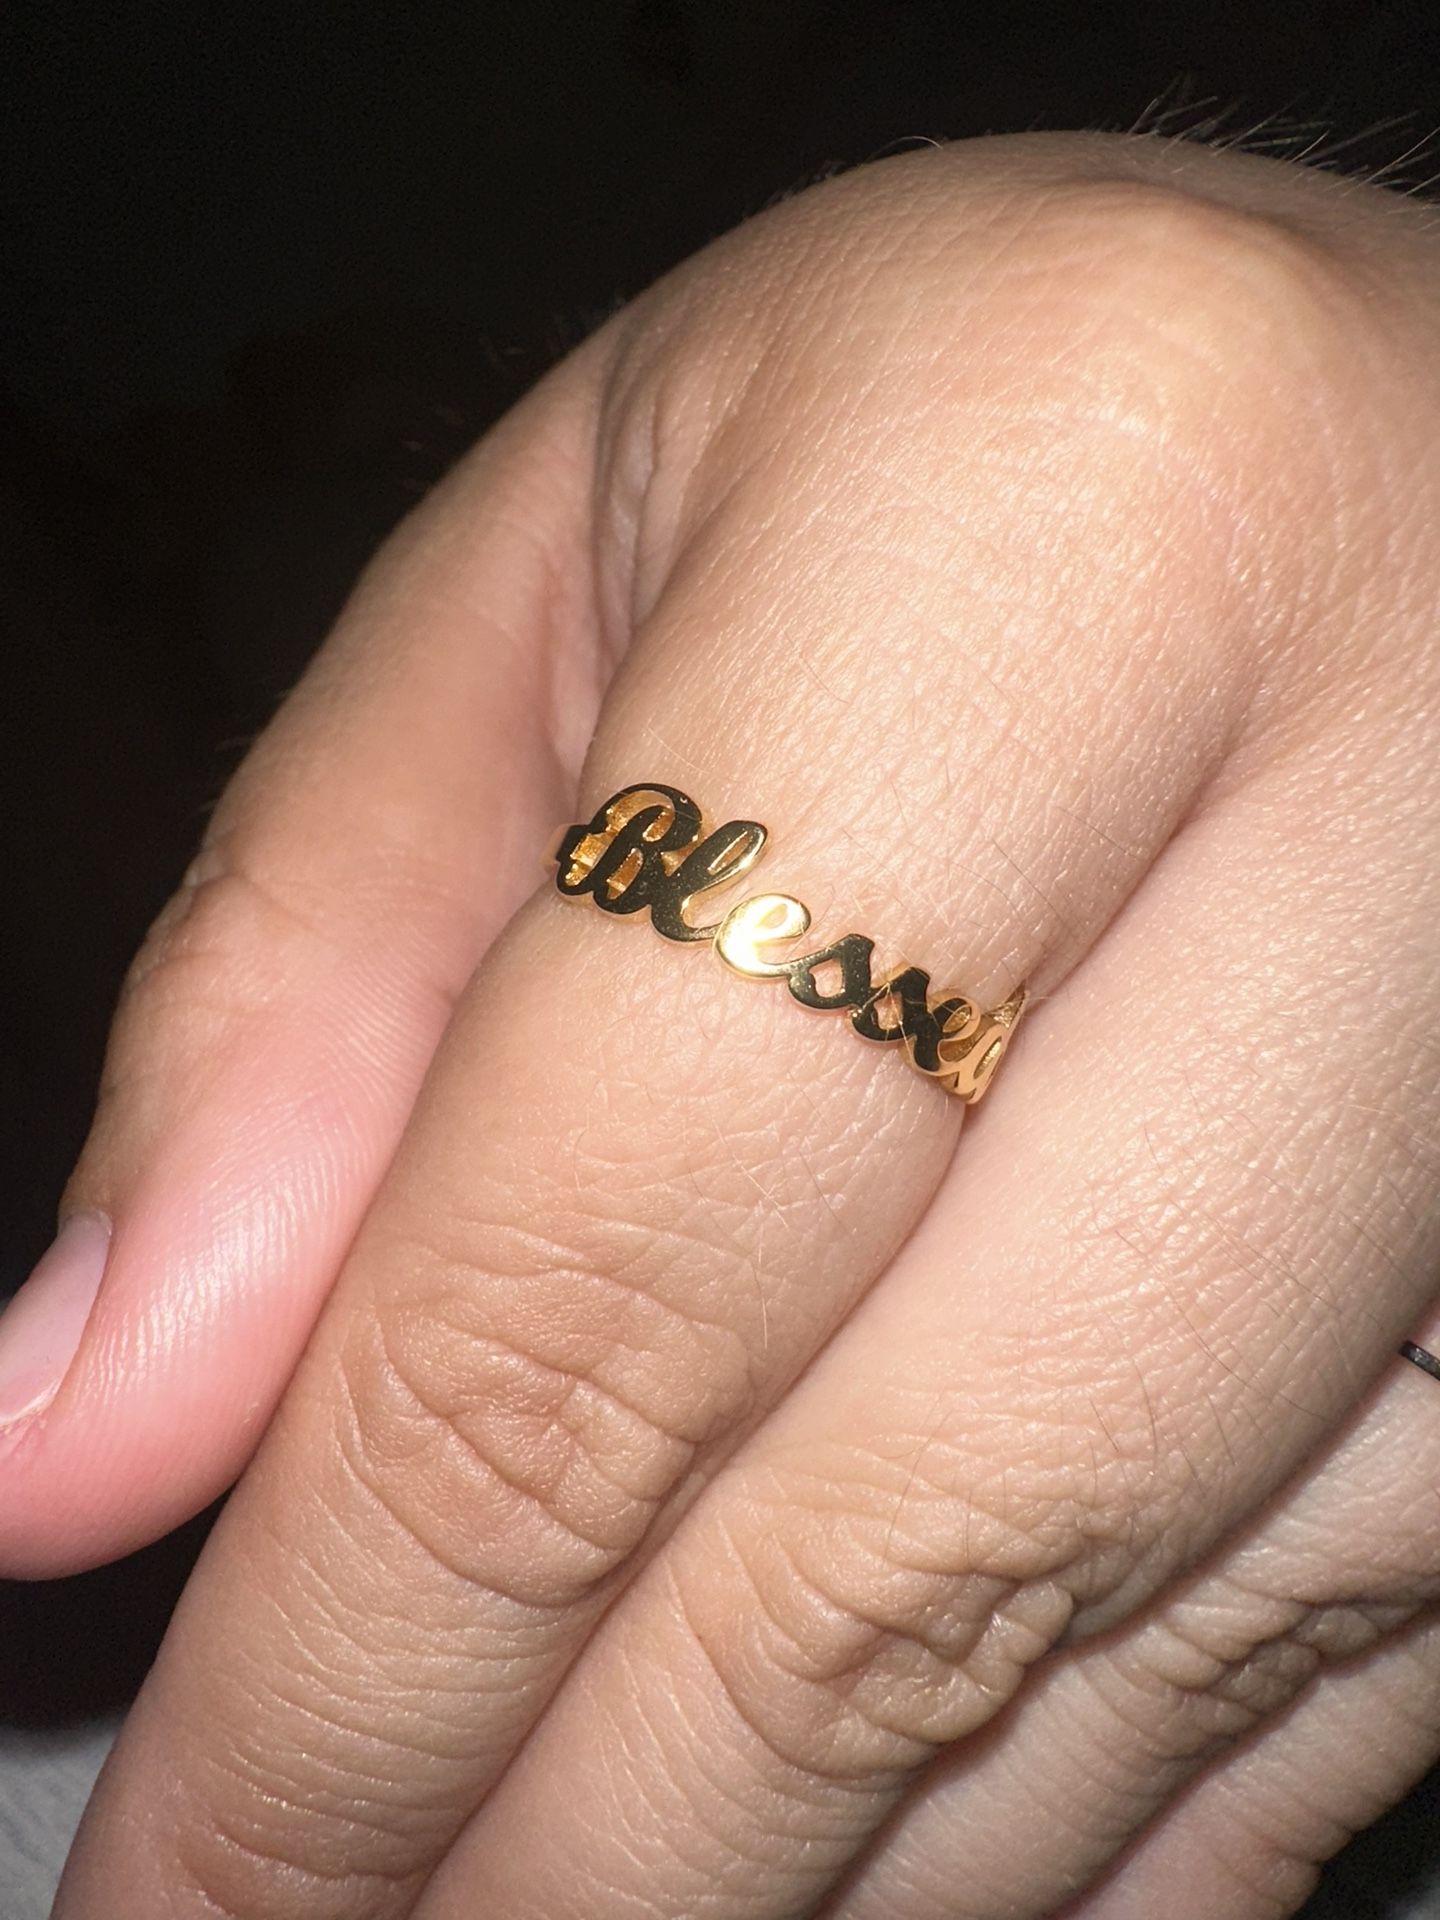 Blessed Ring Size 9 